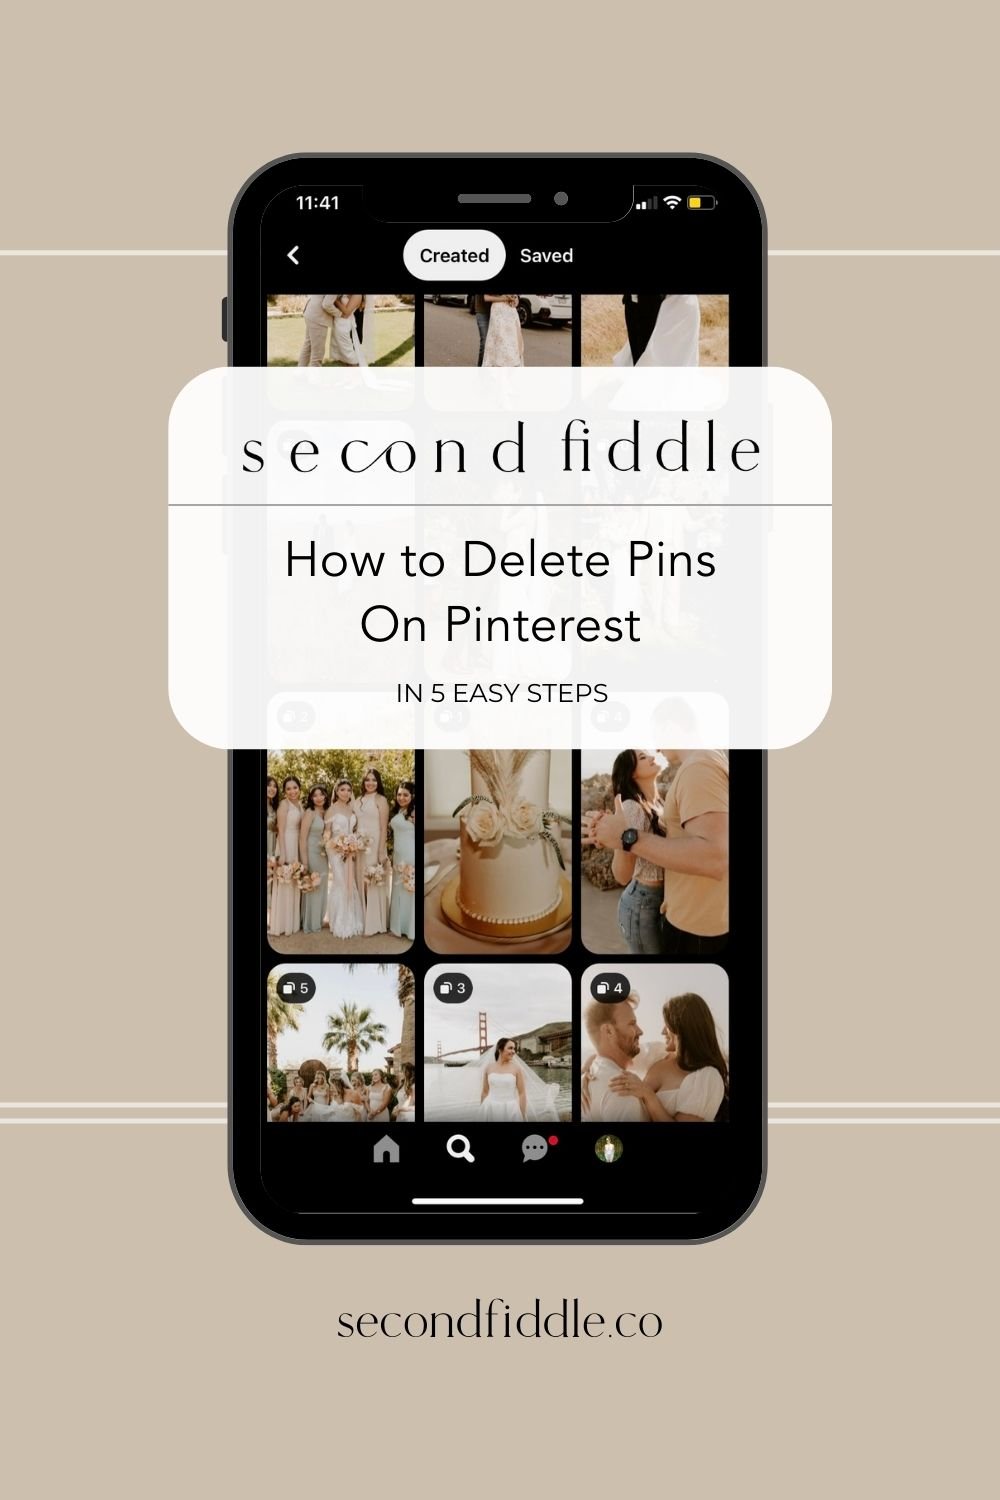 How to Delete Pins on Pinterest (5 Easy Steps) - Second Fiddle